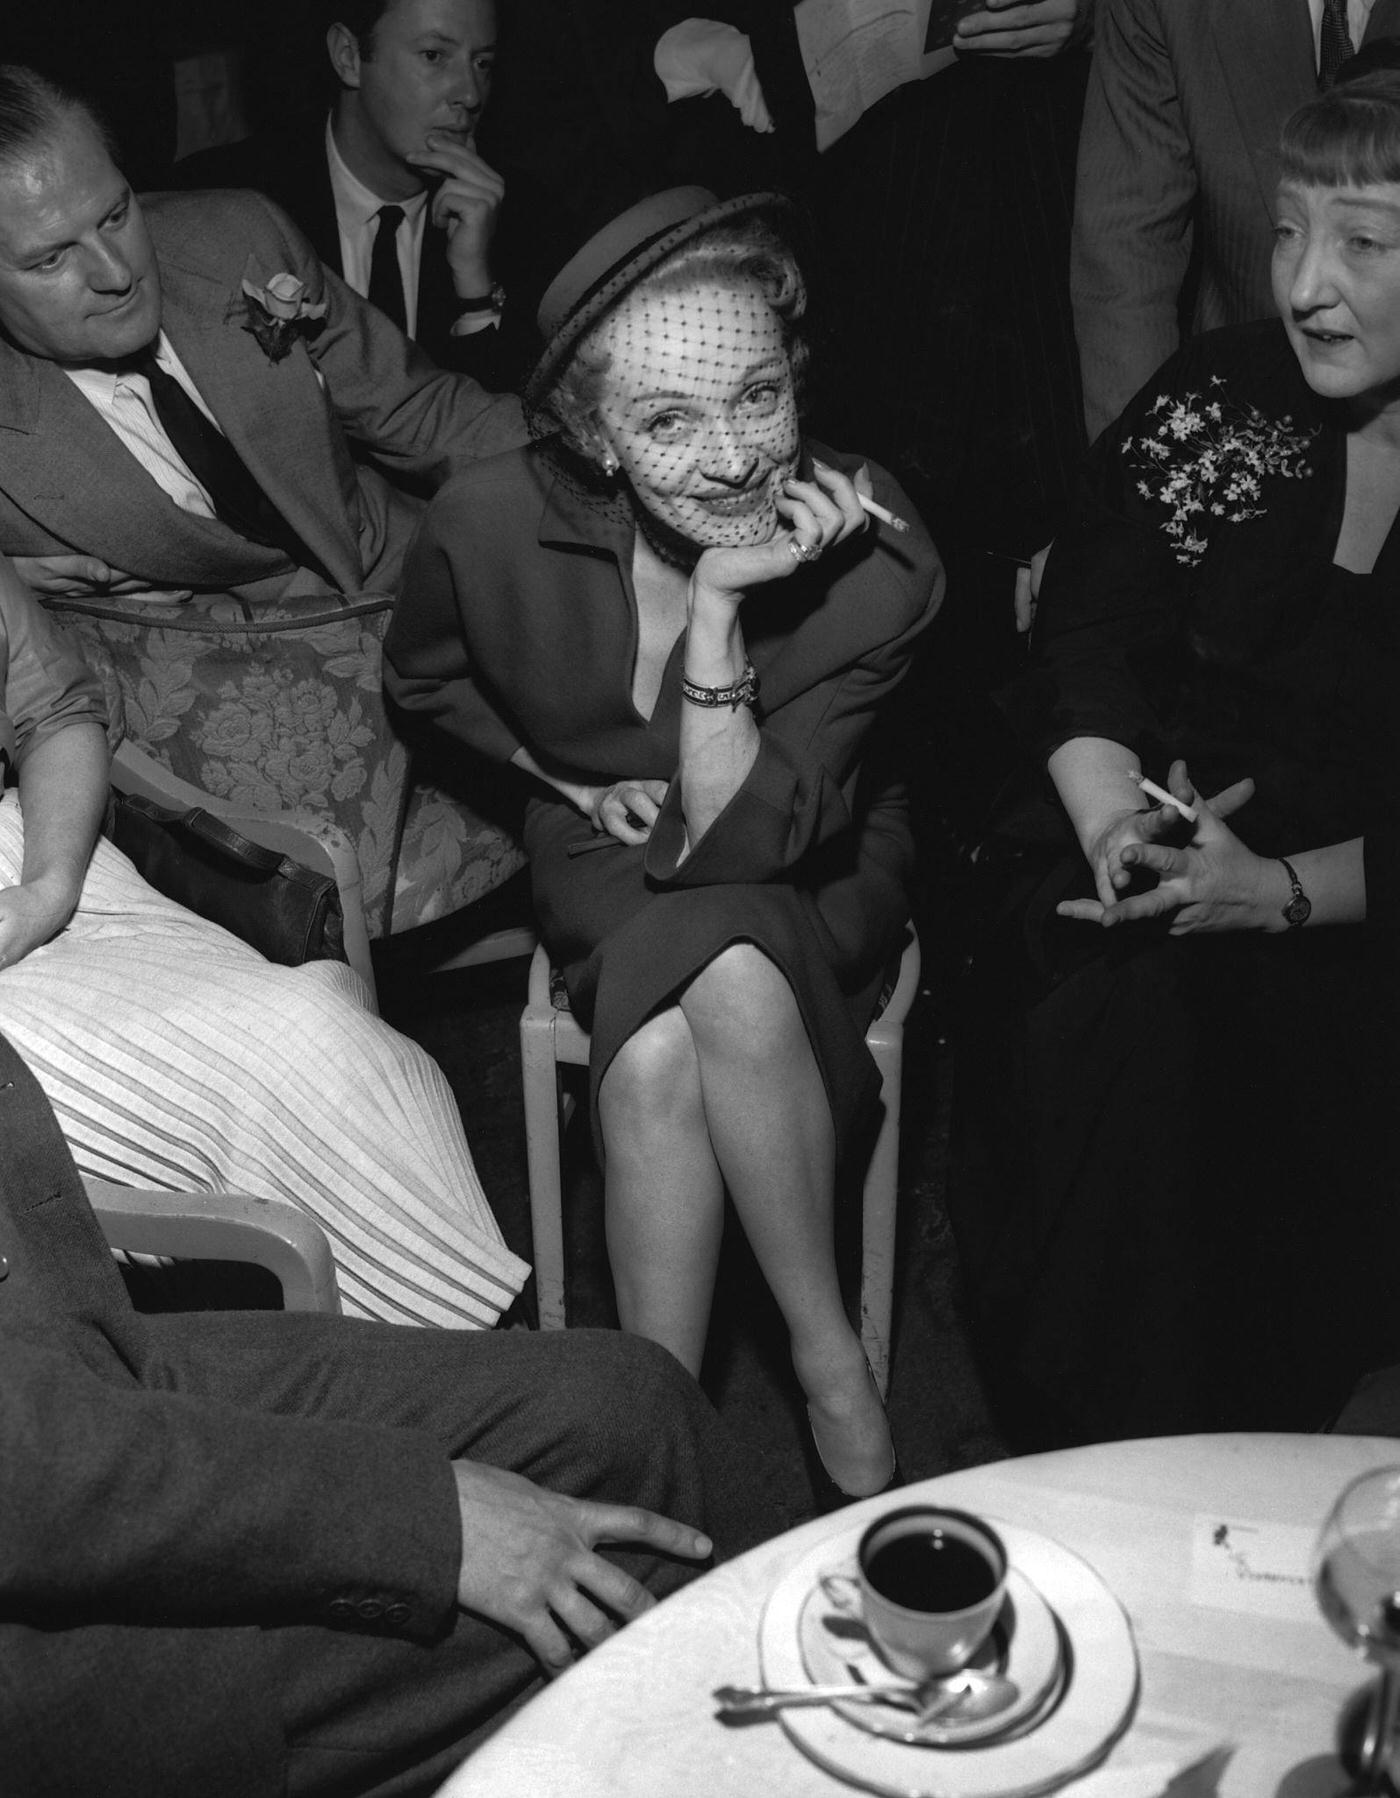 Marlene Dietrich smiles for photographers in 1954.